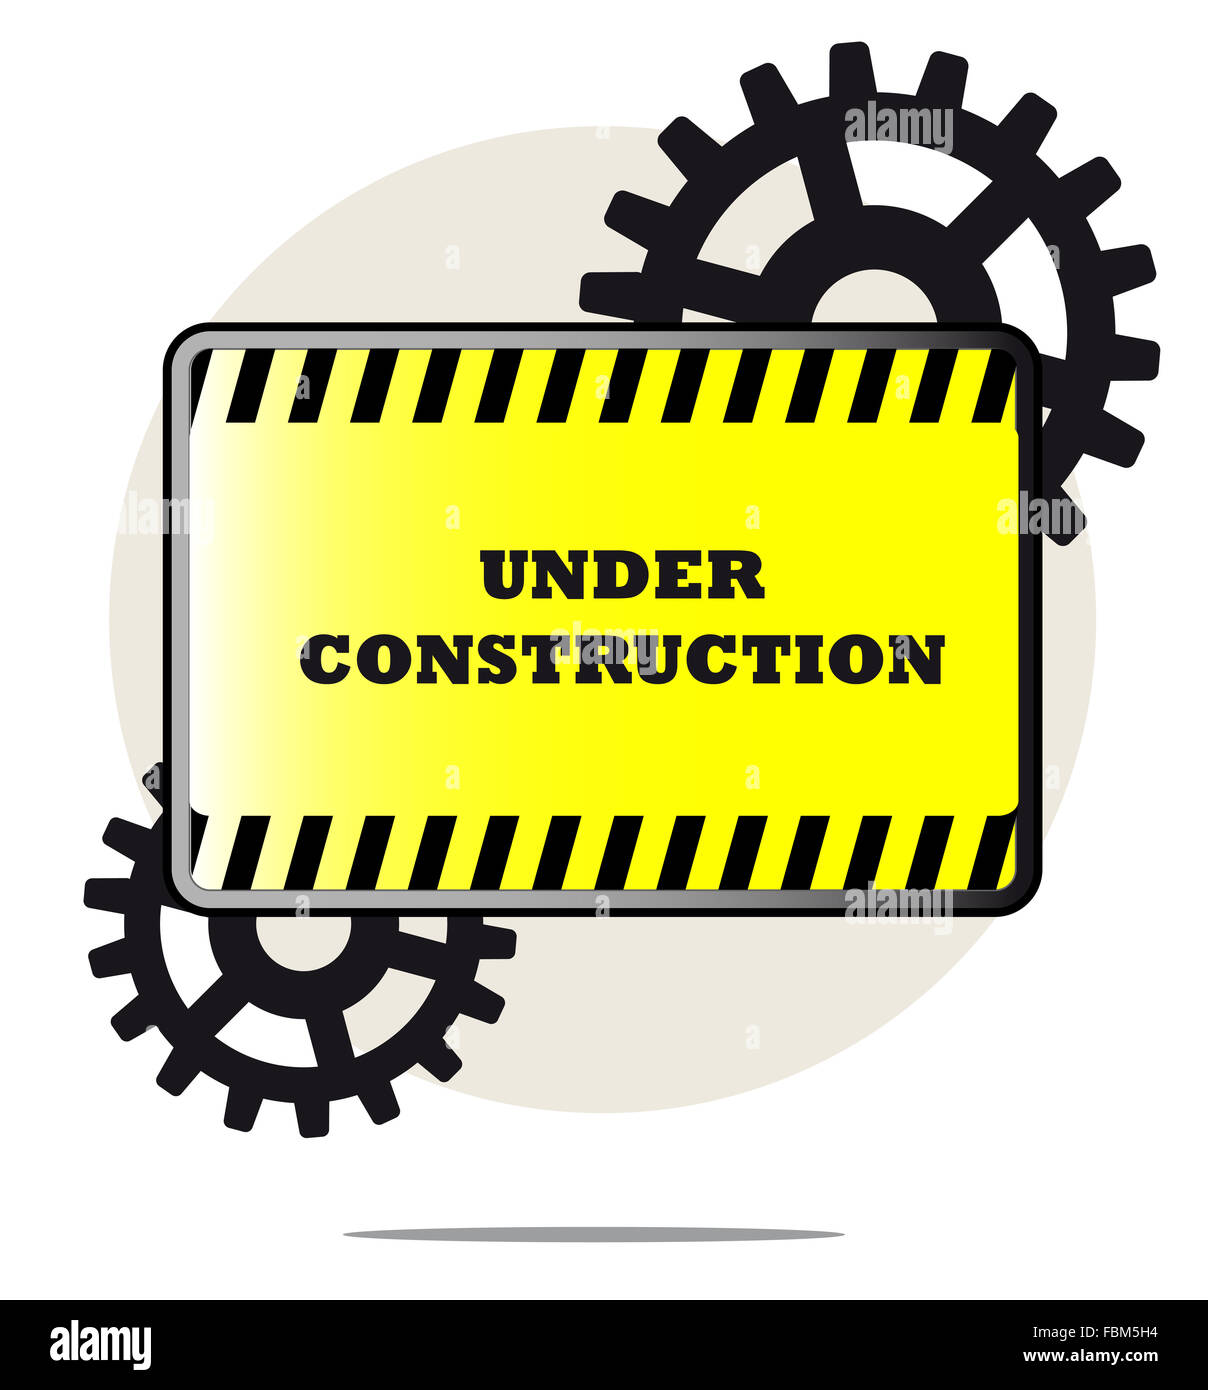 Illustration of under construction sign with gears and white background Stock Photo